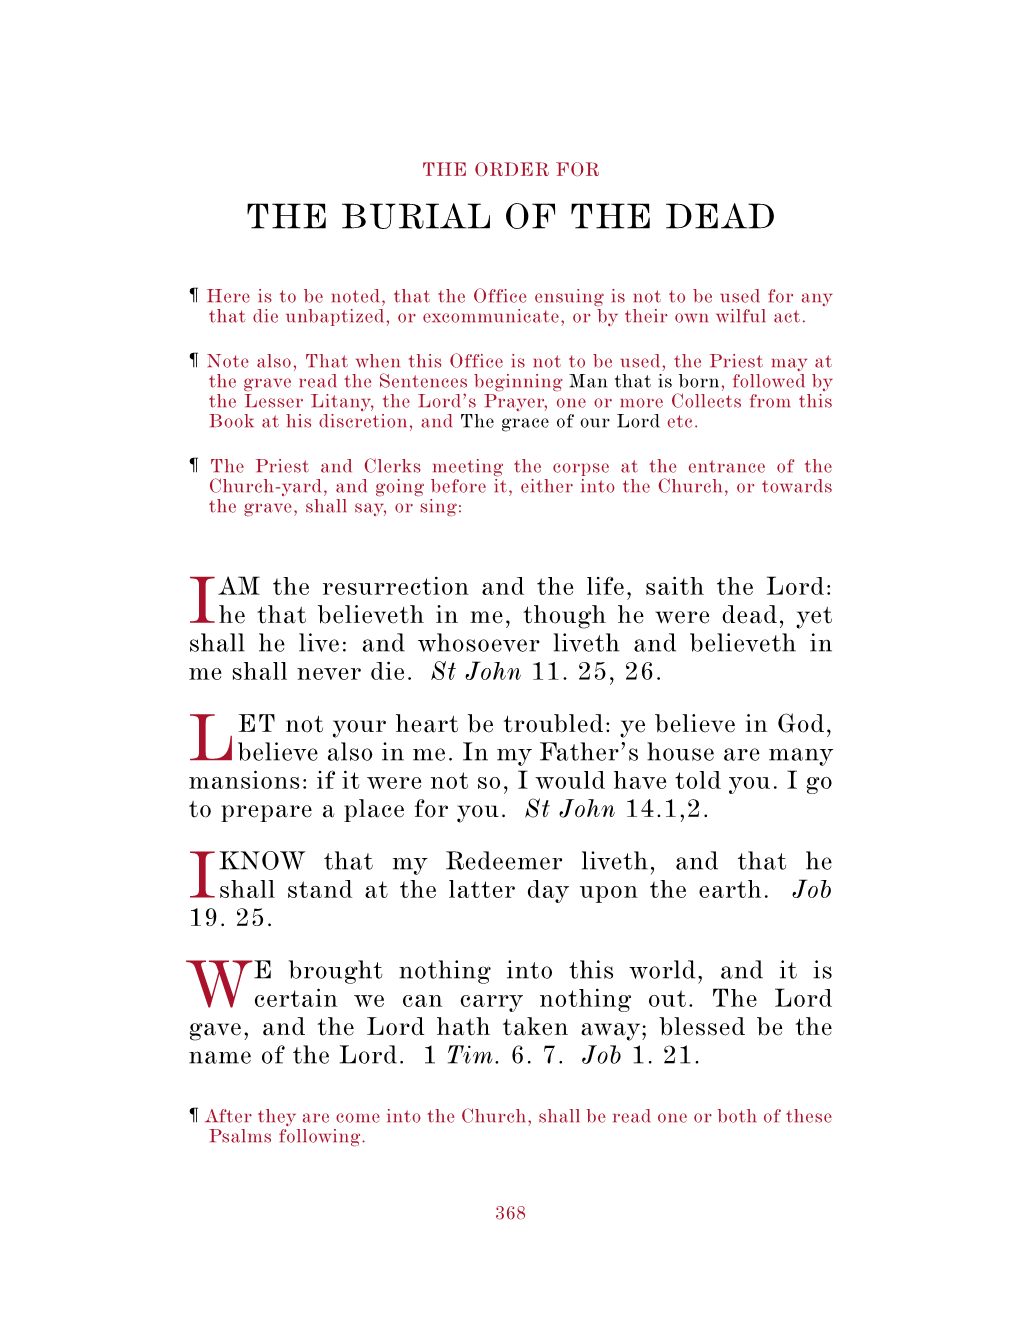 The Order for the Burial of the Dead